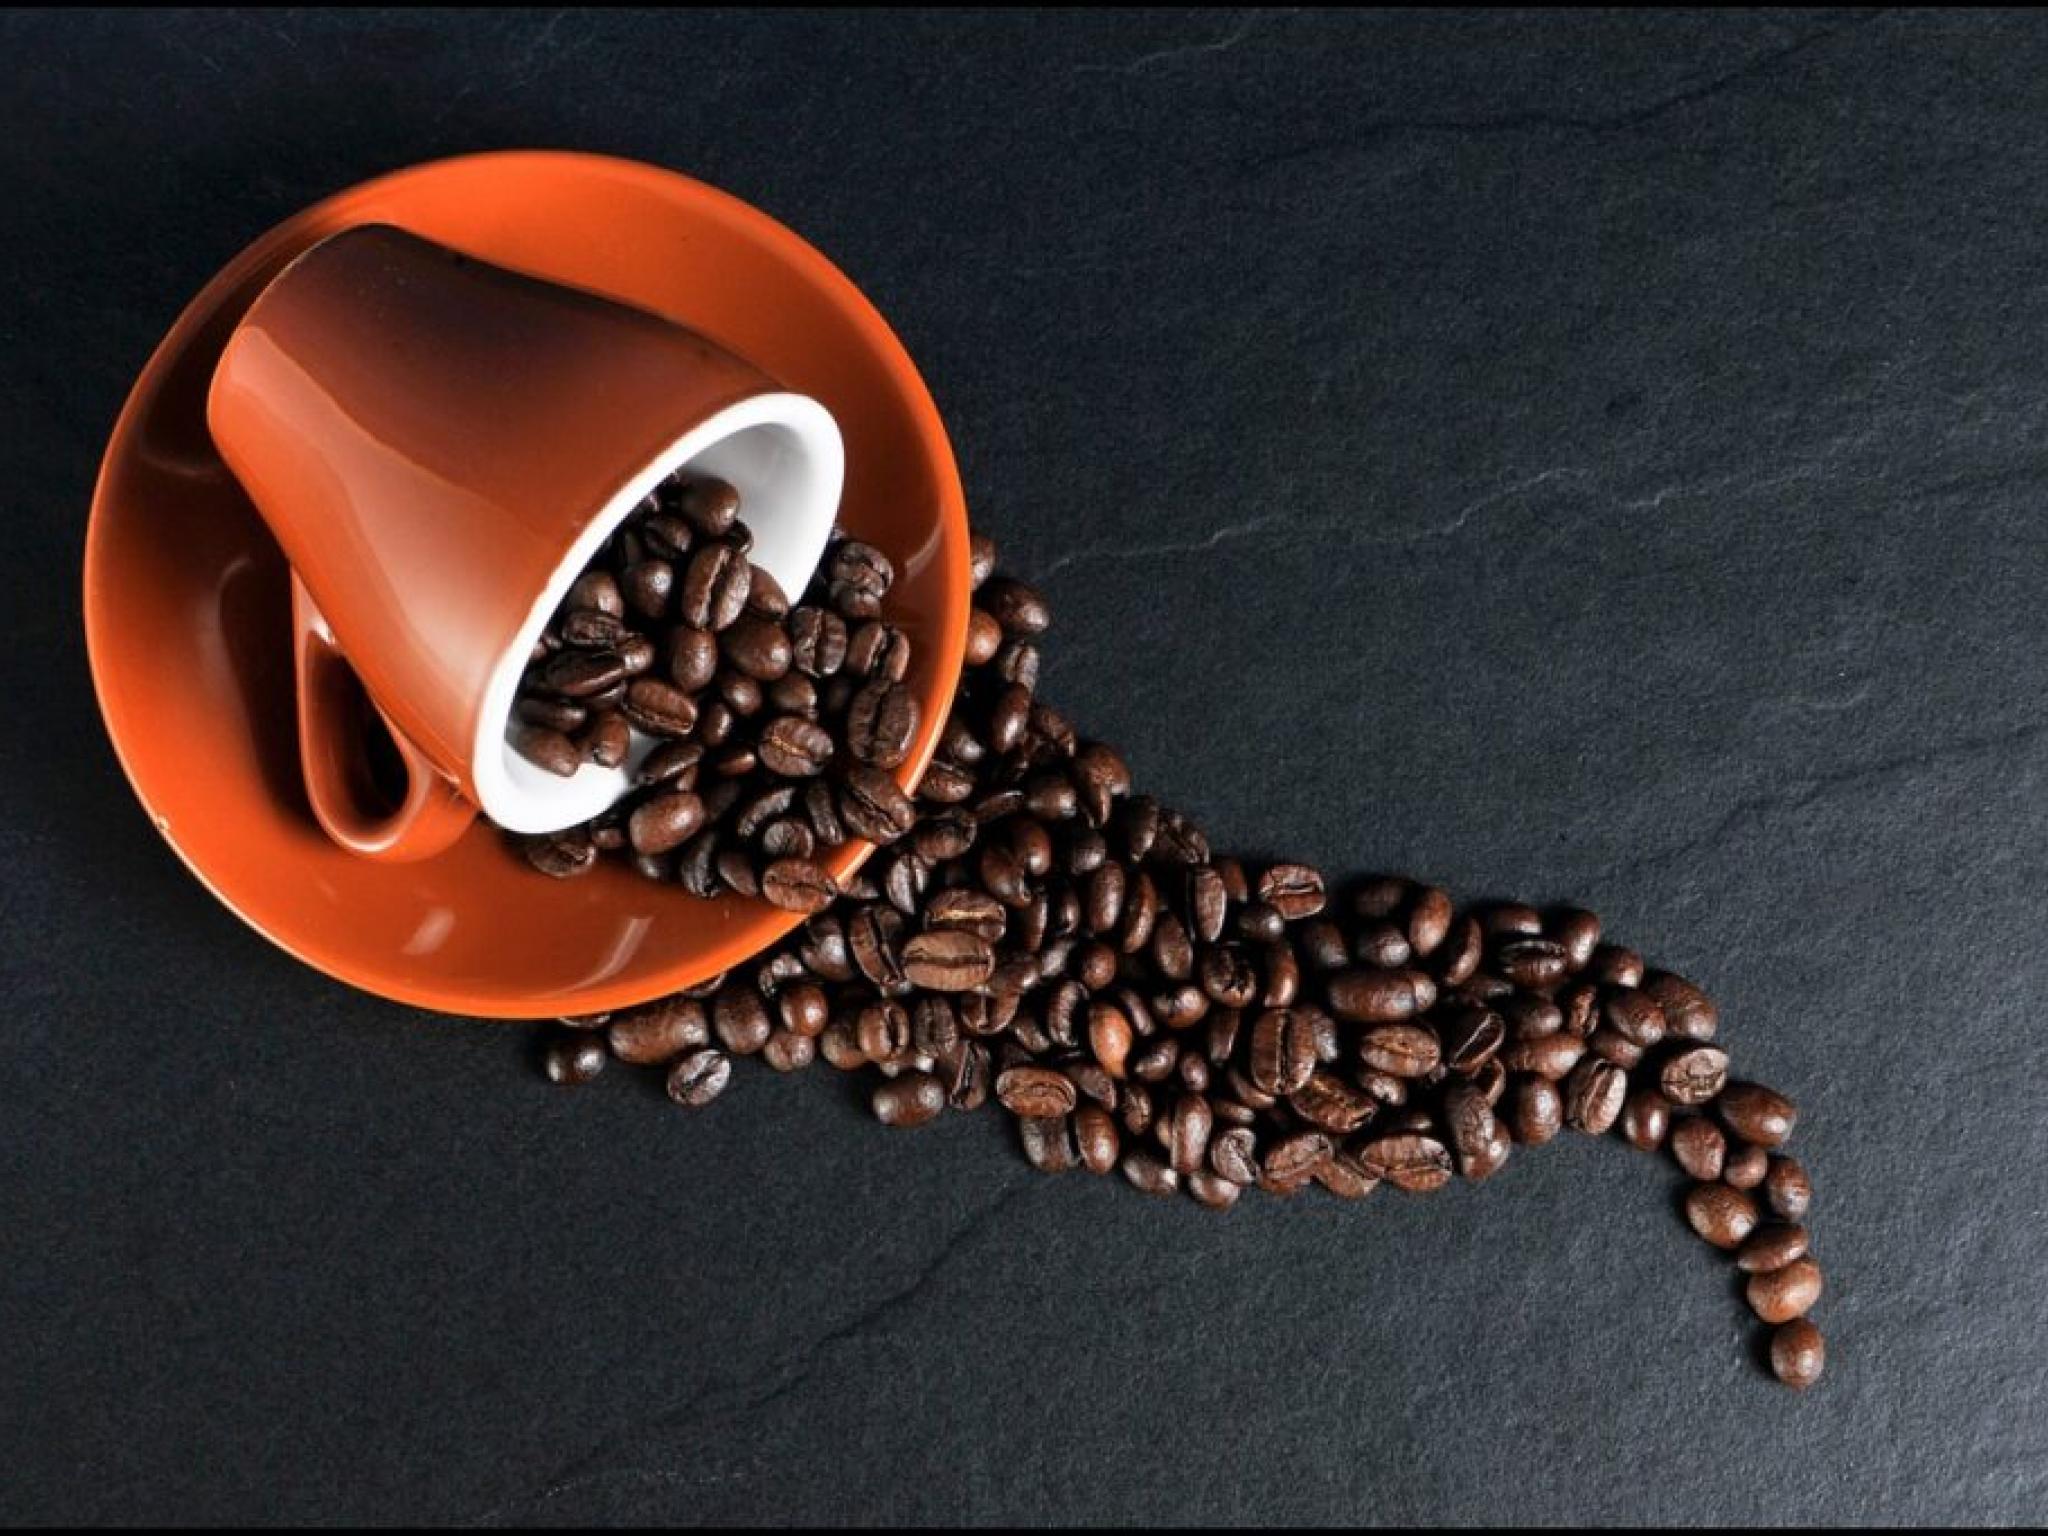  coffee-supply-concerns-drive-up-costs-for-a-cup-of-joe 